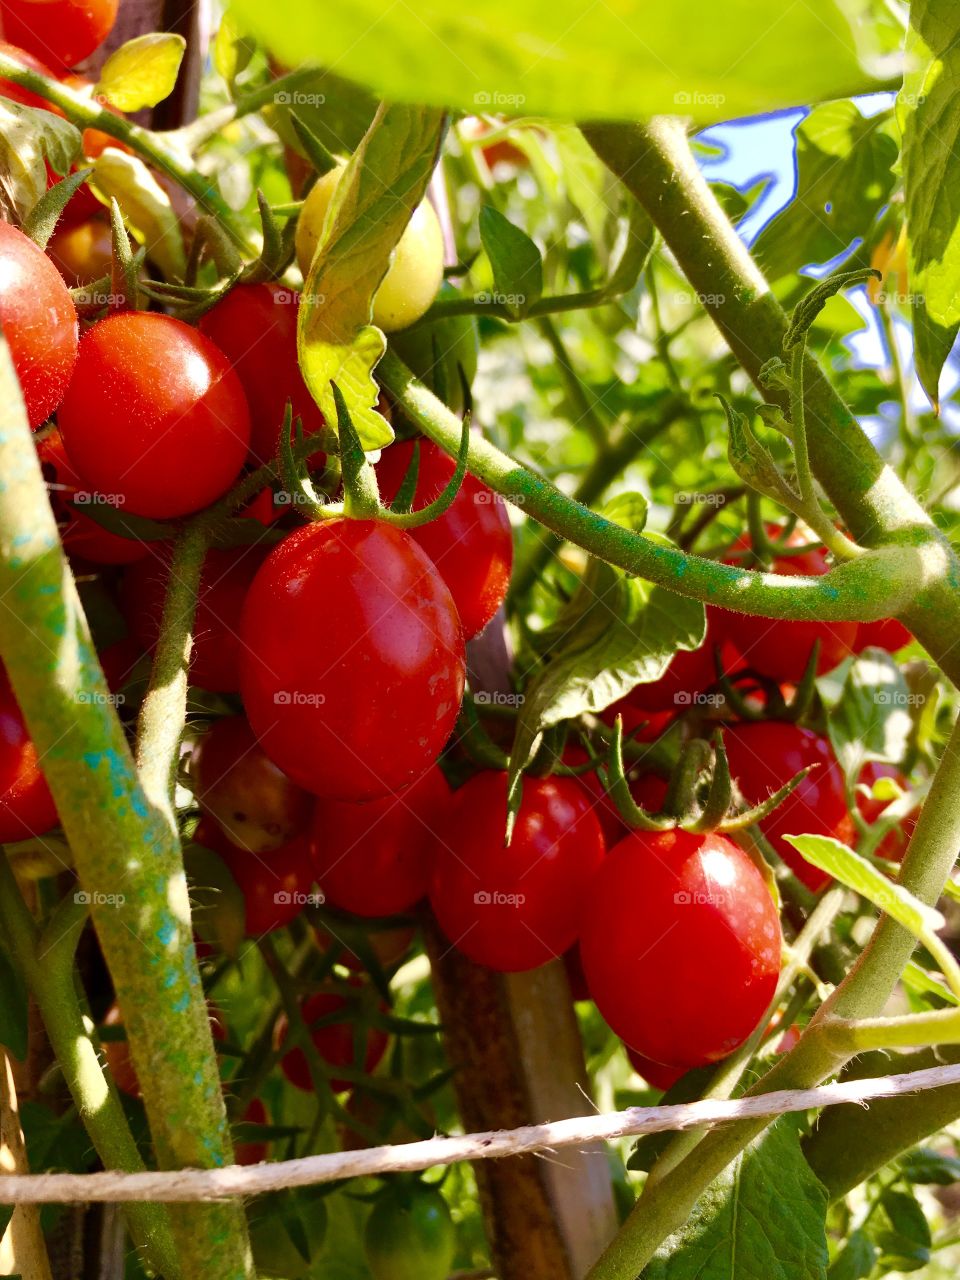 detail of tomato plant with bunch of red fruits, in the background other blur tomatoes